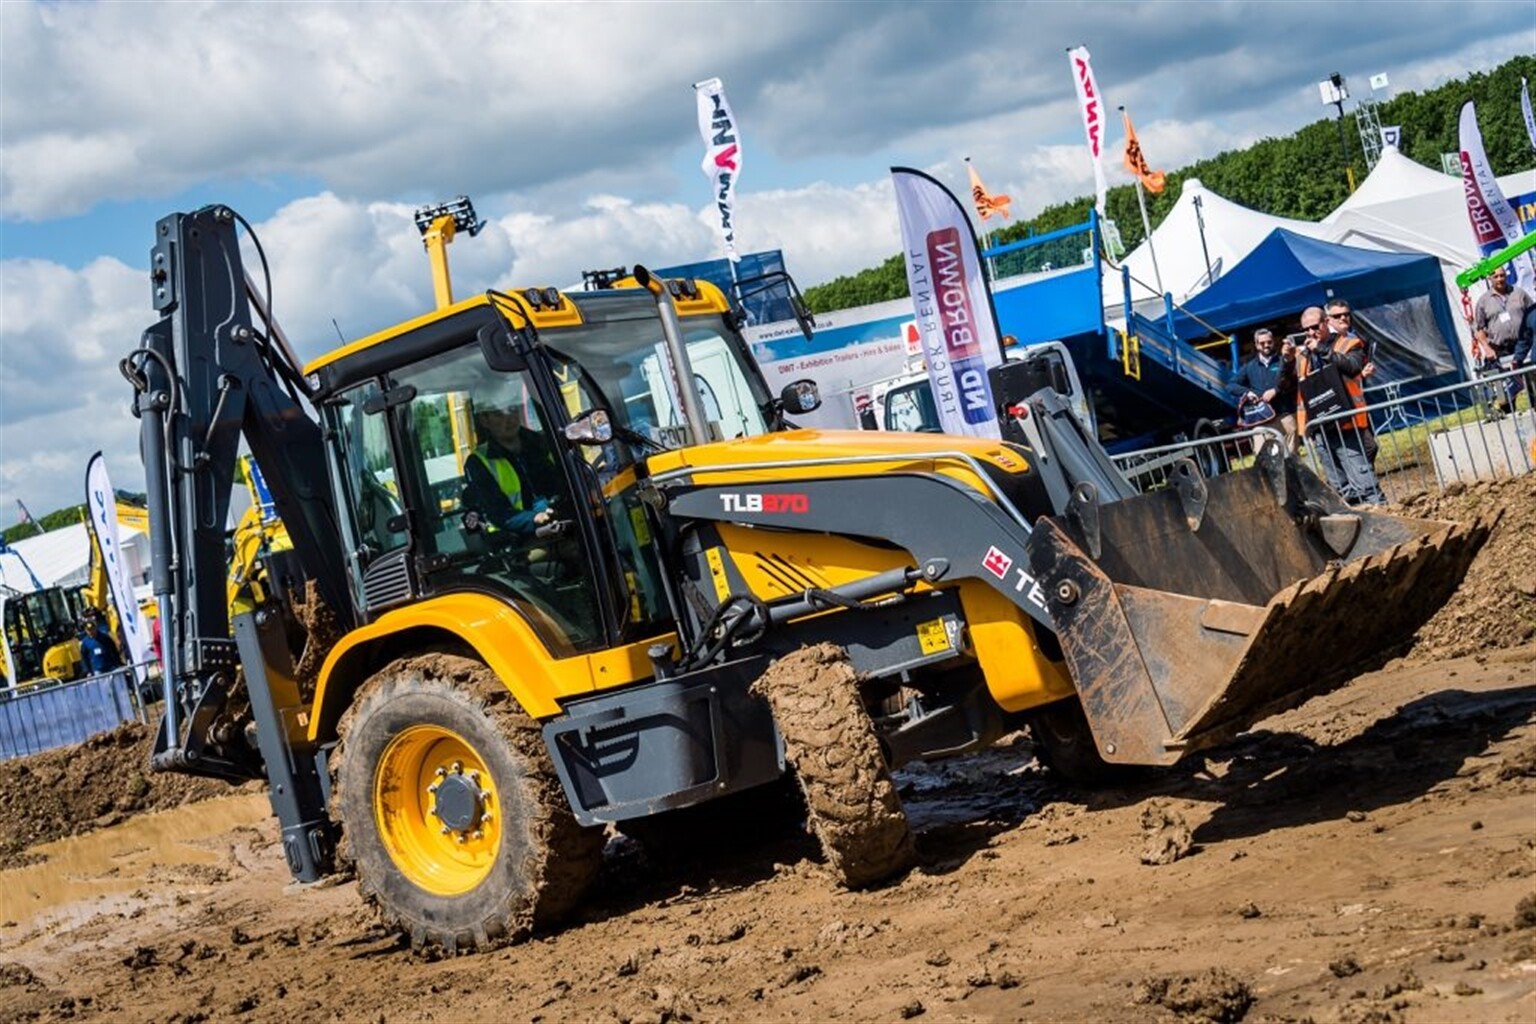 Working demonstrations remain key at Plantworx  111 exhibitors to date